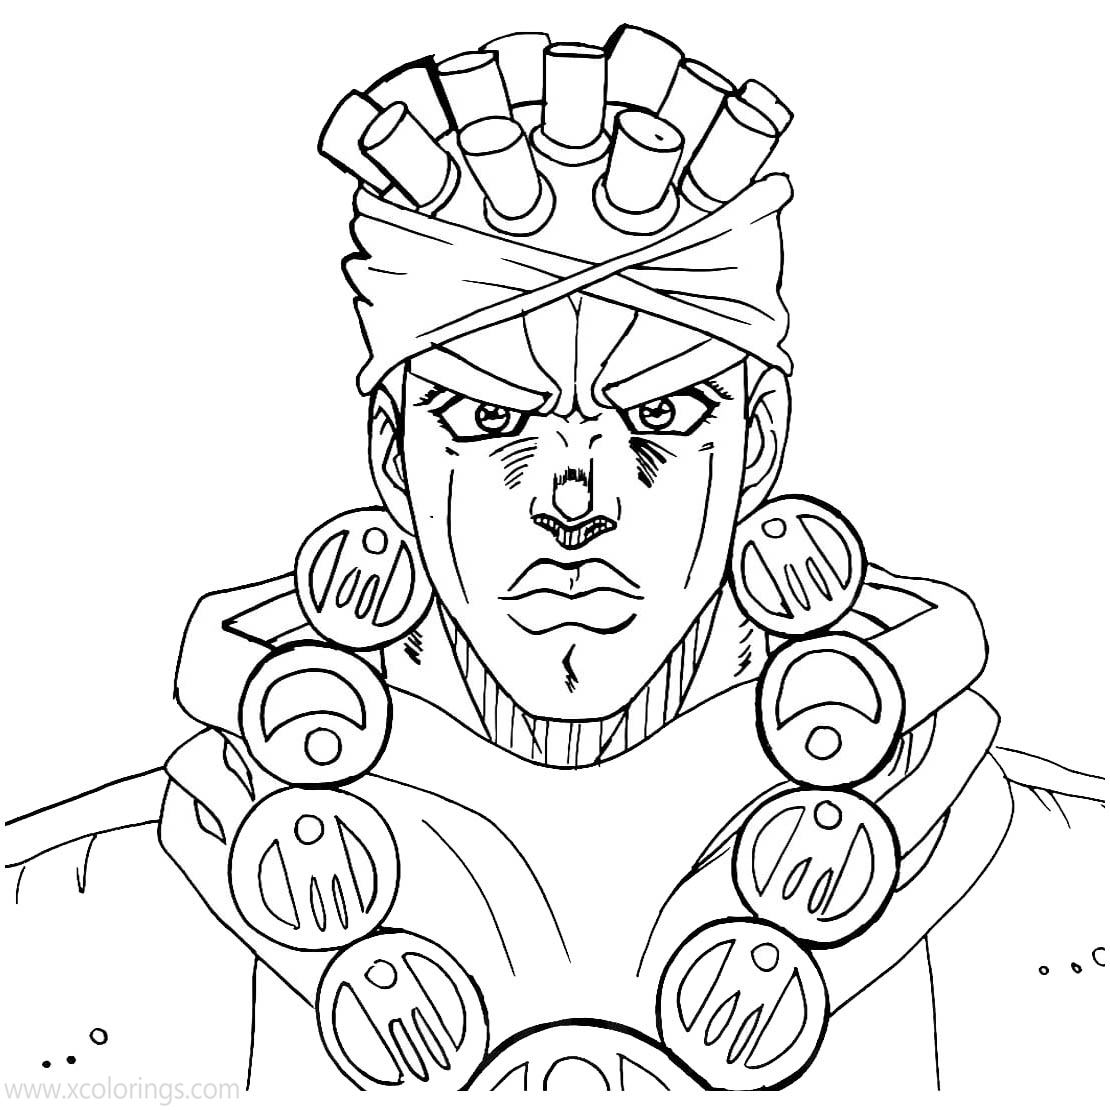 Free Avdol from JoJo's Bizarre Adventure Coloring Pages printable